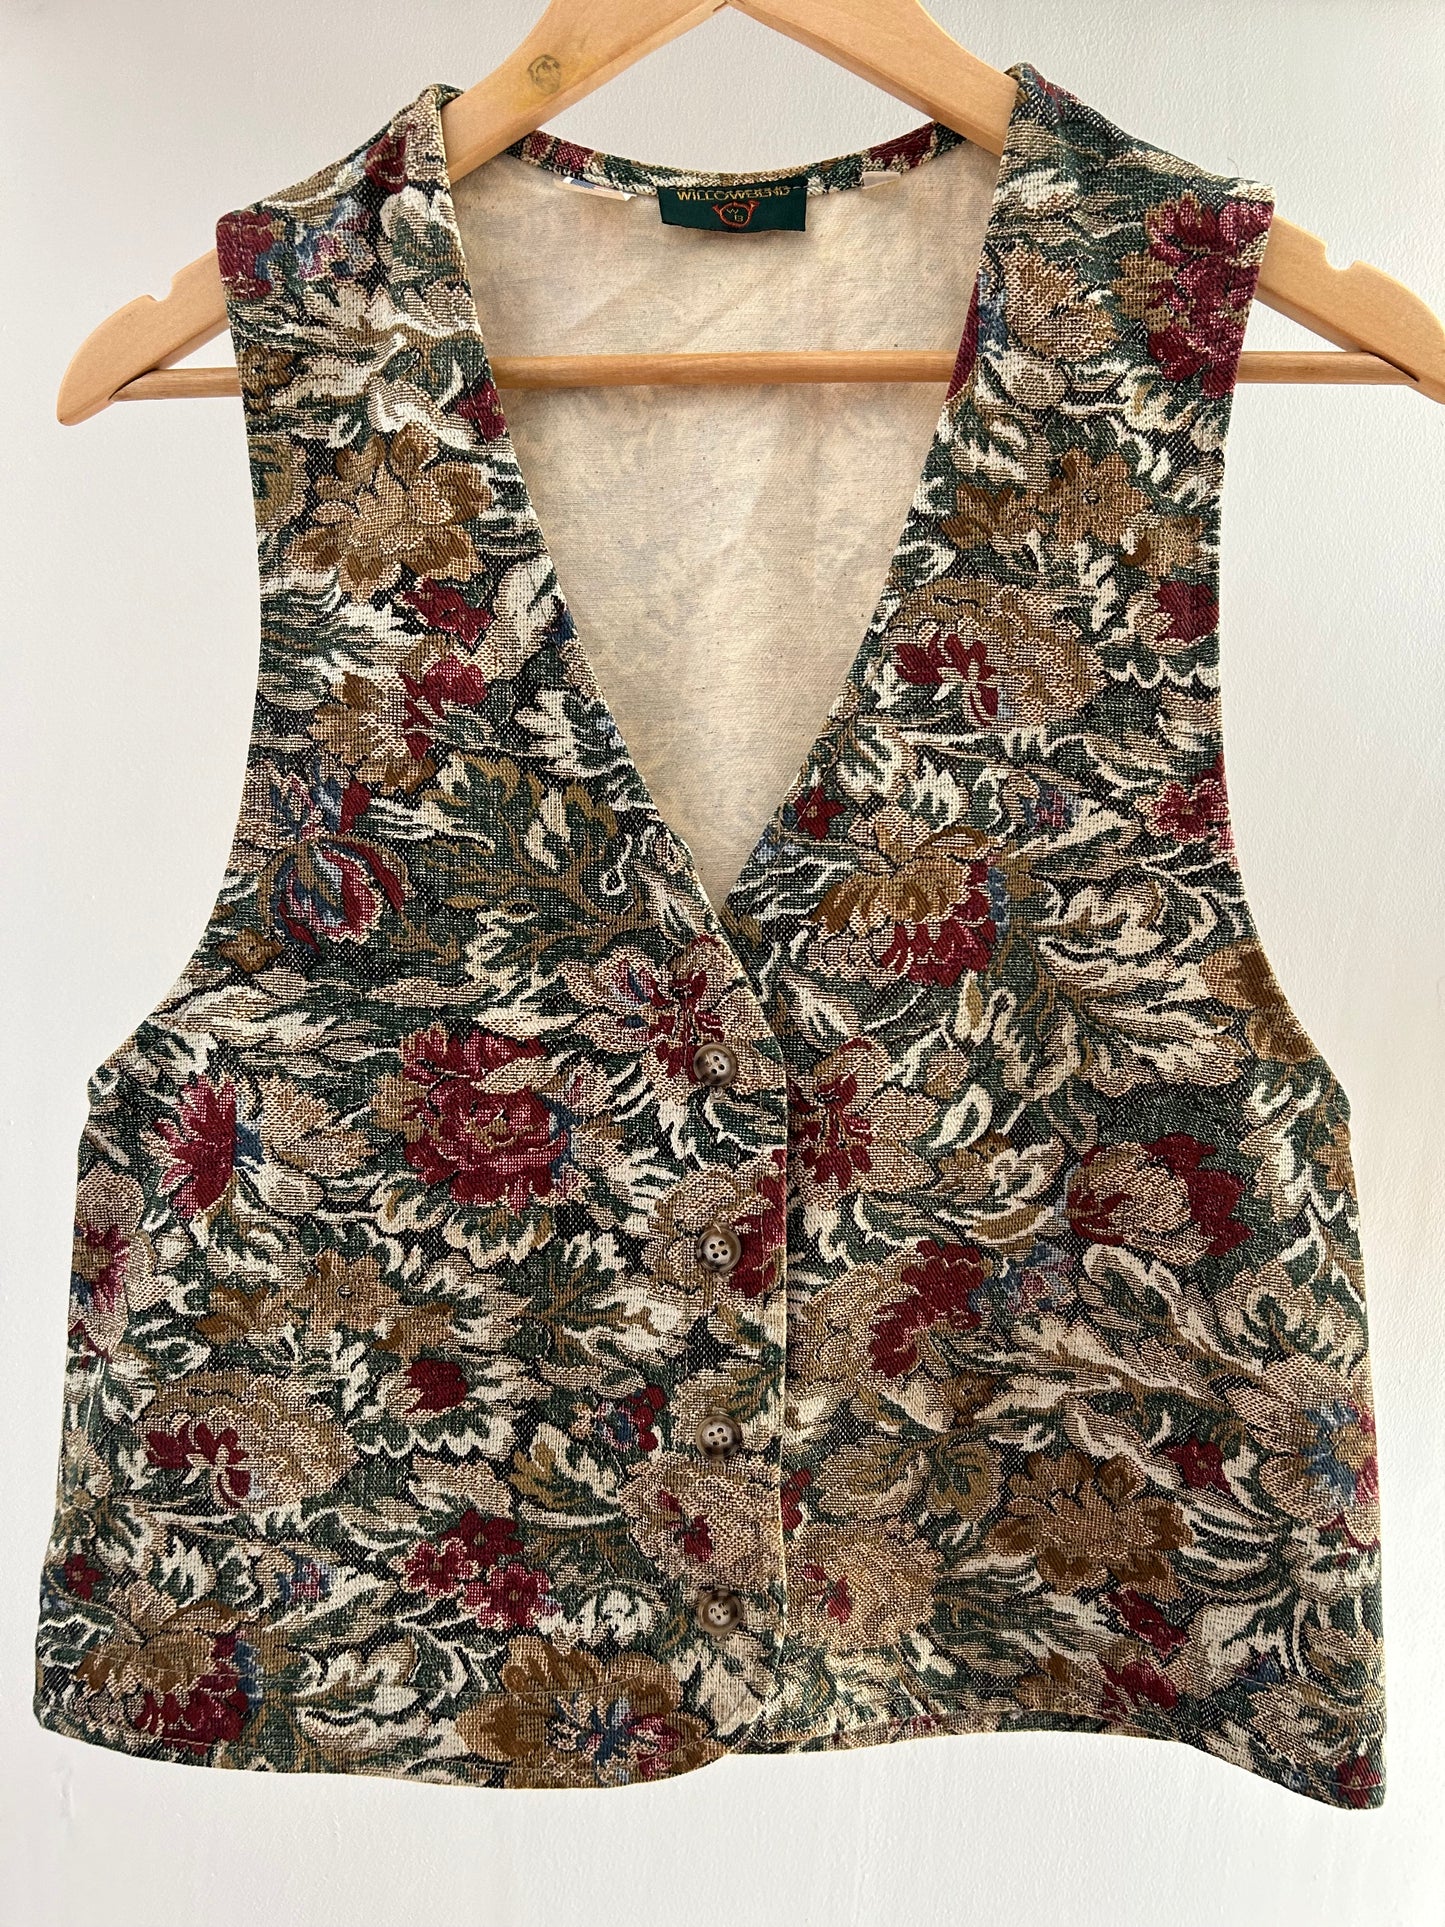 Vintage 1980s 1990s WILLOWBEND UK Size 10 (USA SMALL) Dark Green Dark Red & Cream Floral Tapestry 100% Cotton Waistcoat